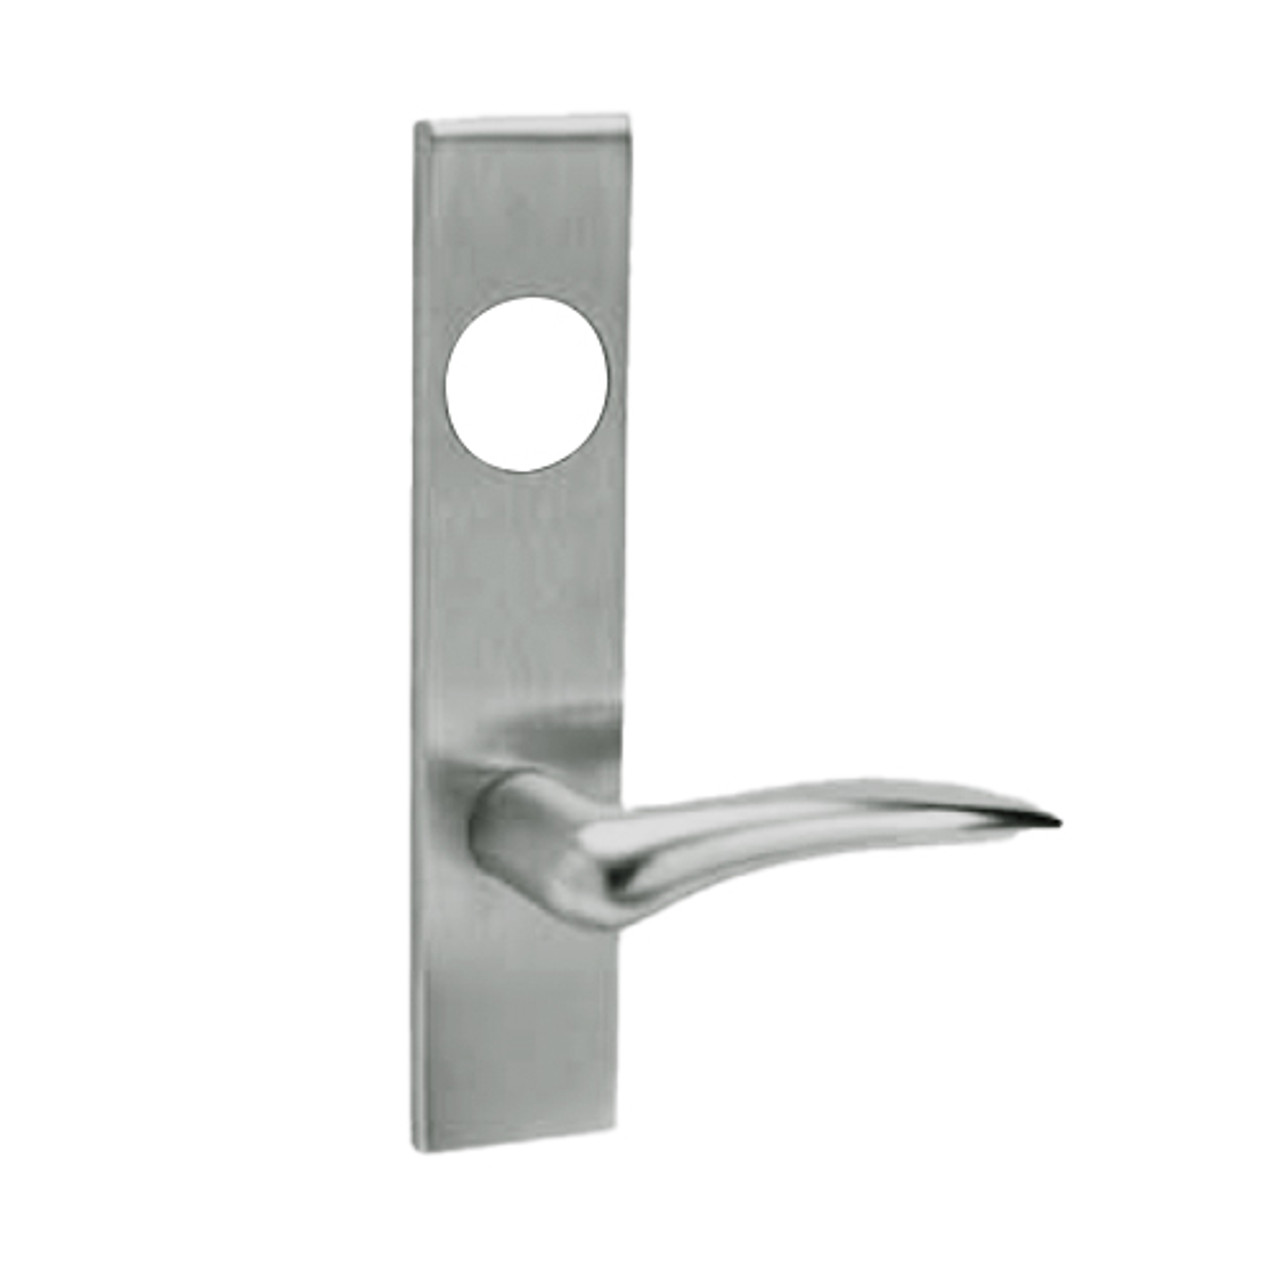 ML2052-DSR-619-CL6-LH Corbin Russwin ML2000 Series IC 6-Pin Less Core Mortise Classroom Intruder Locksets with Dirke Lever in Satin Nickel